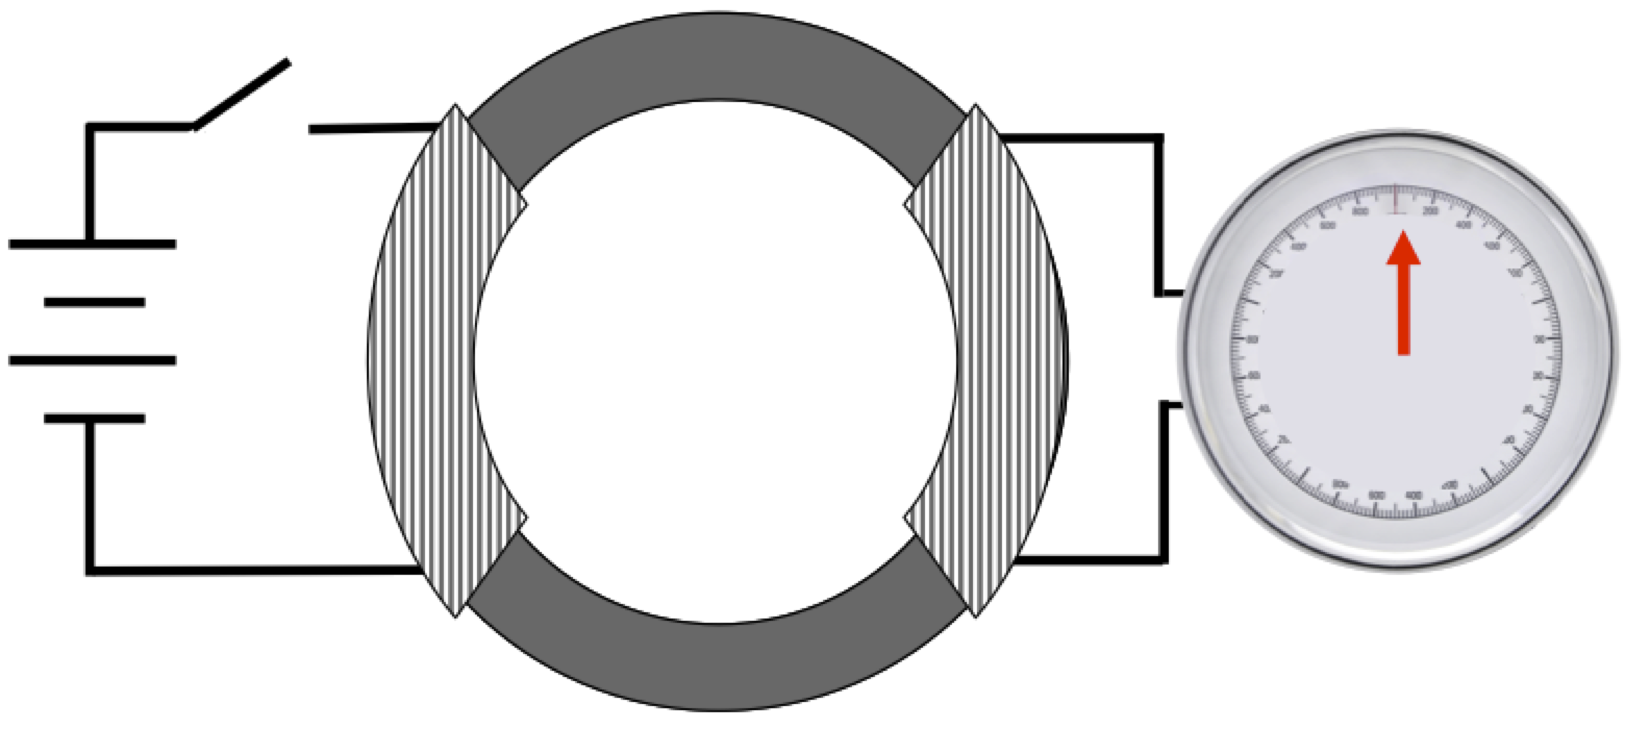 When the switch on the left is closed, then current flows through the circuit encircling one part of the iron core. The right- hand circuit contains no current source, but yet the needle on the galvanometer moved indicating that a current had been produced. Faraday interpreted the source to be a changing magnetic field, enhanced and contained within the iron toroid.